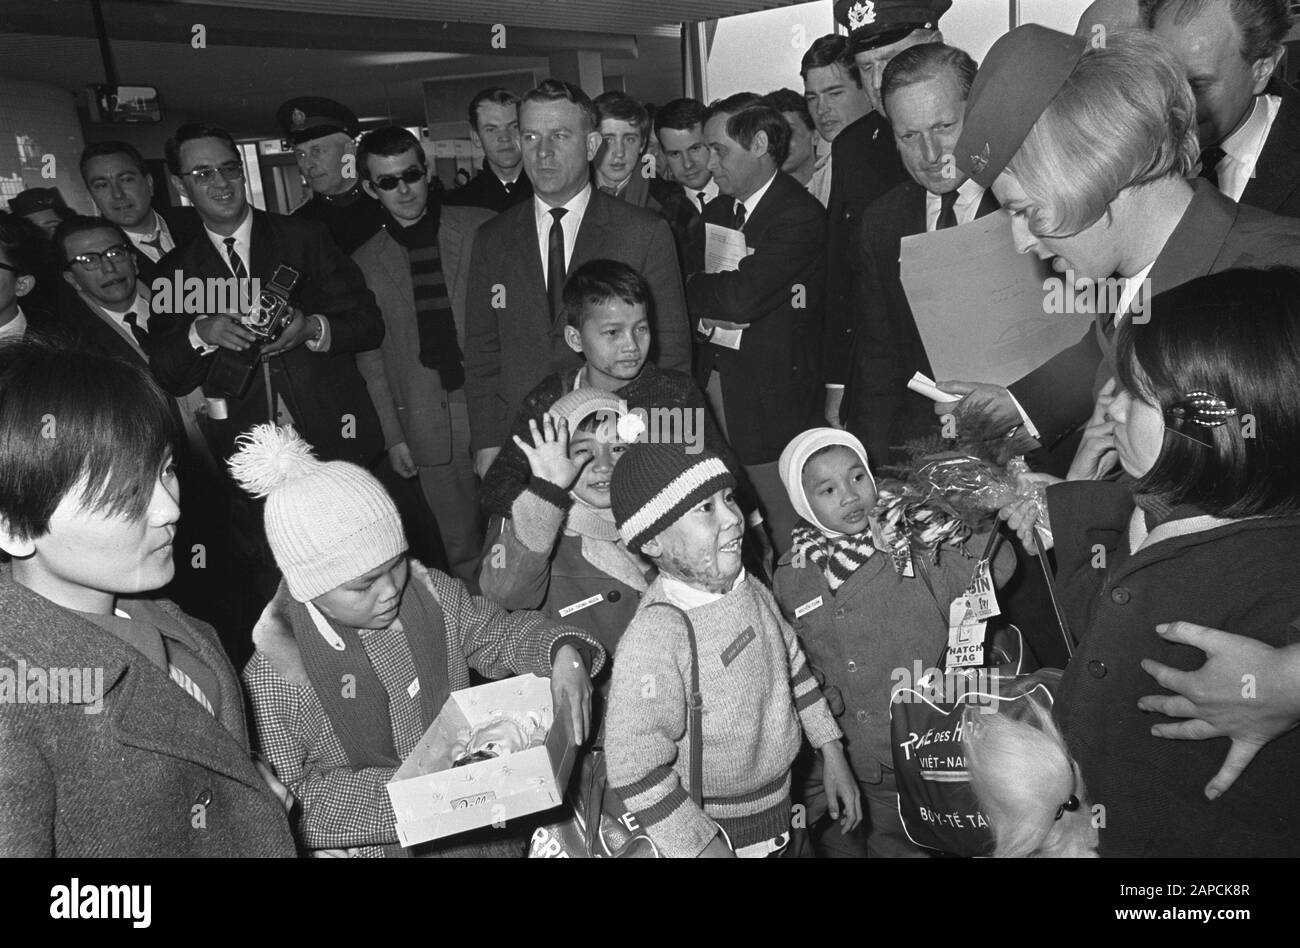 Arrival Vietnamese children at Schiphol. Troug Phai Anh Dao gives Le Thi Trai a doll upon arrival Date: 20 December 1967 Location: Noord-Holland, Schiphol Keywords: Children, arrivals Stock Photo